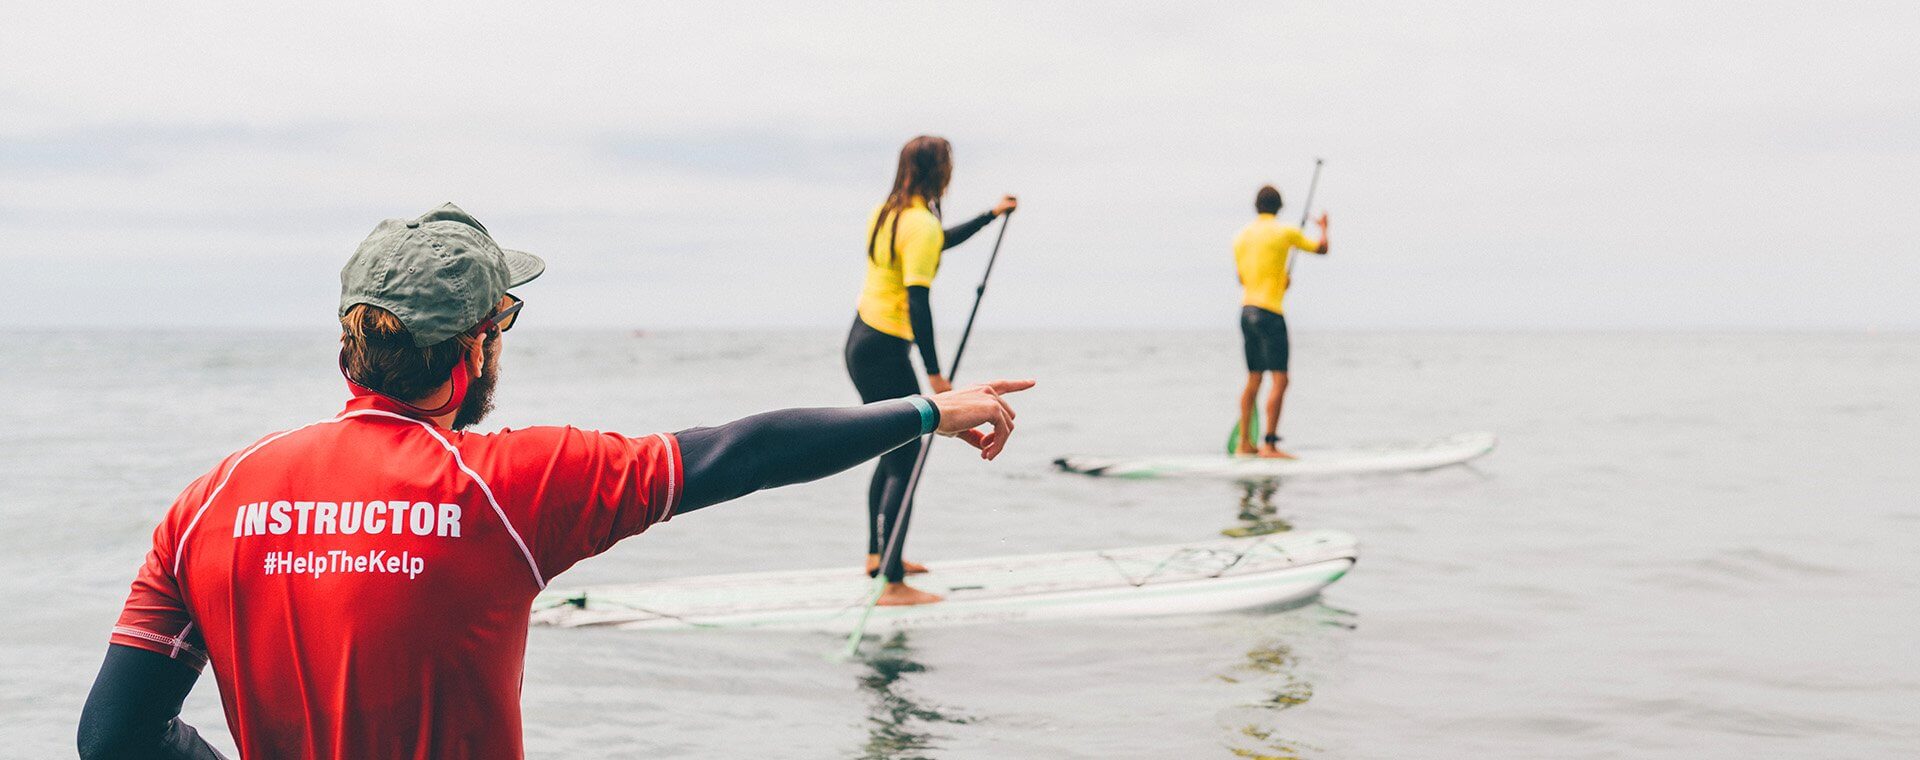 Stand-Up Paddleboarding lessons at Everyday California in La Jolla, San Diego, California